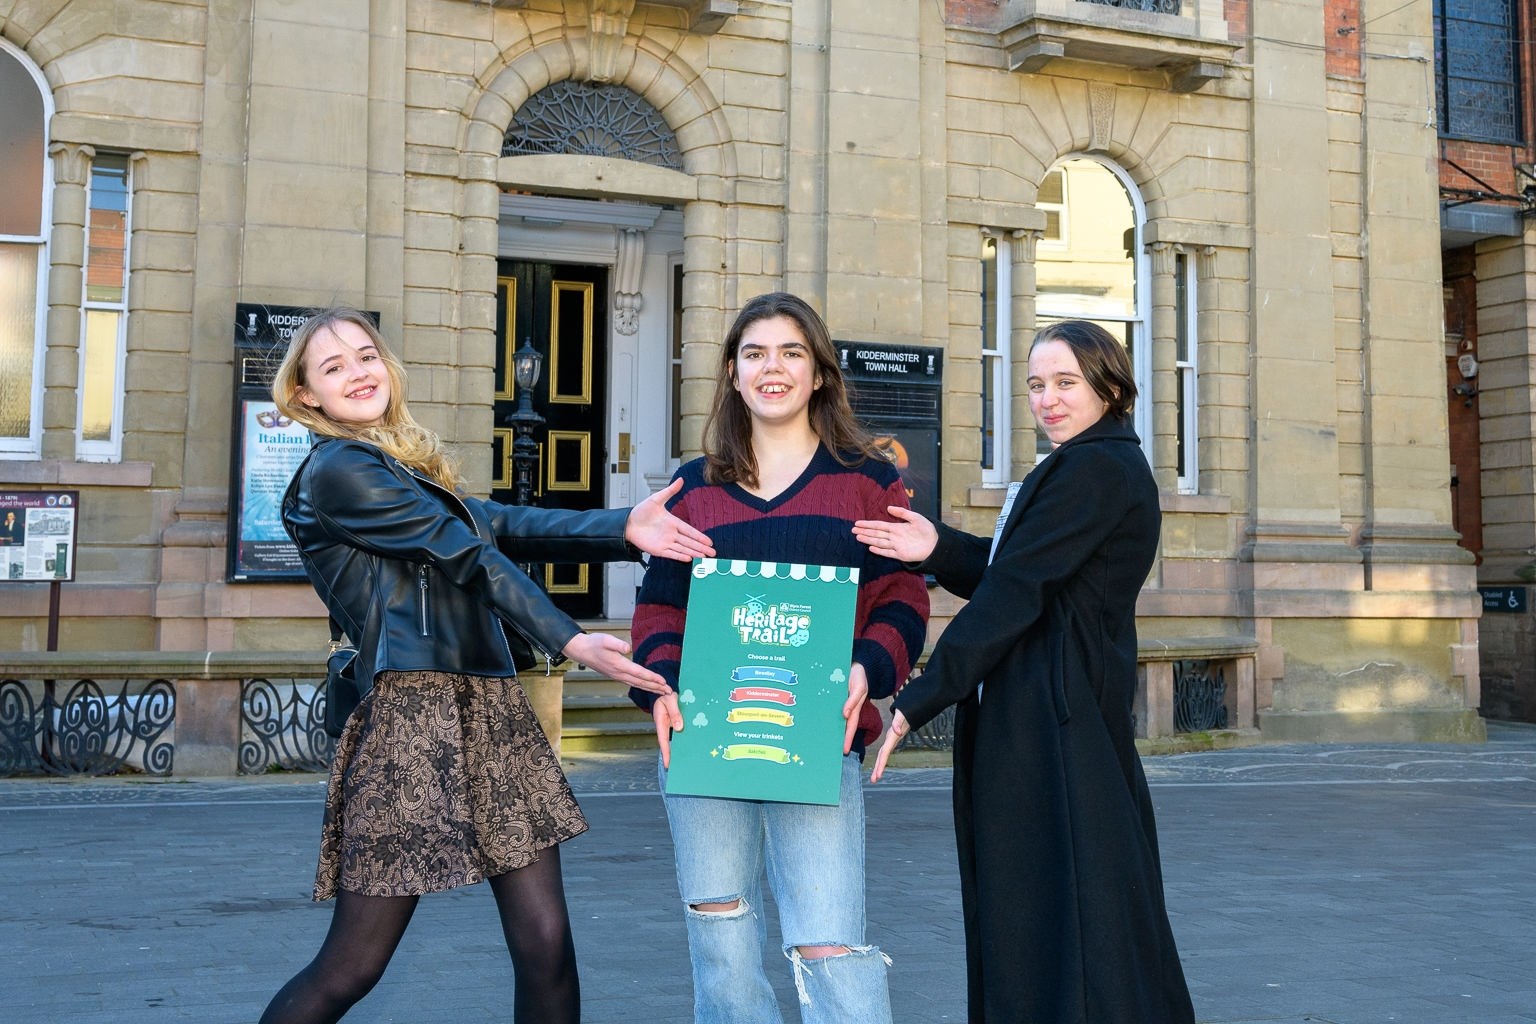 Adele, Sophia and A from the Rose Theatre celebrate the upcoming launch of Wyre Forest Heritage Trail App. 